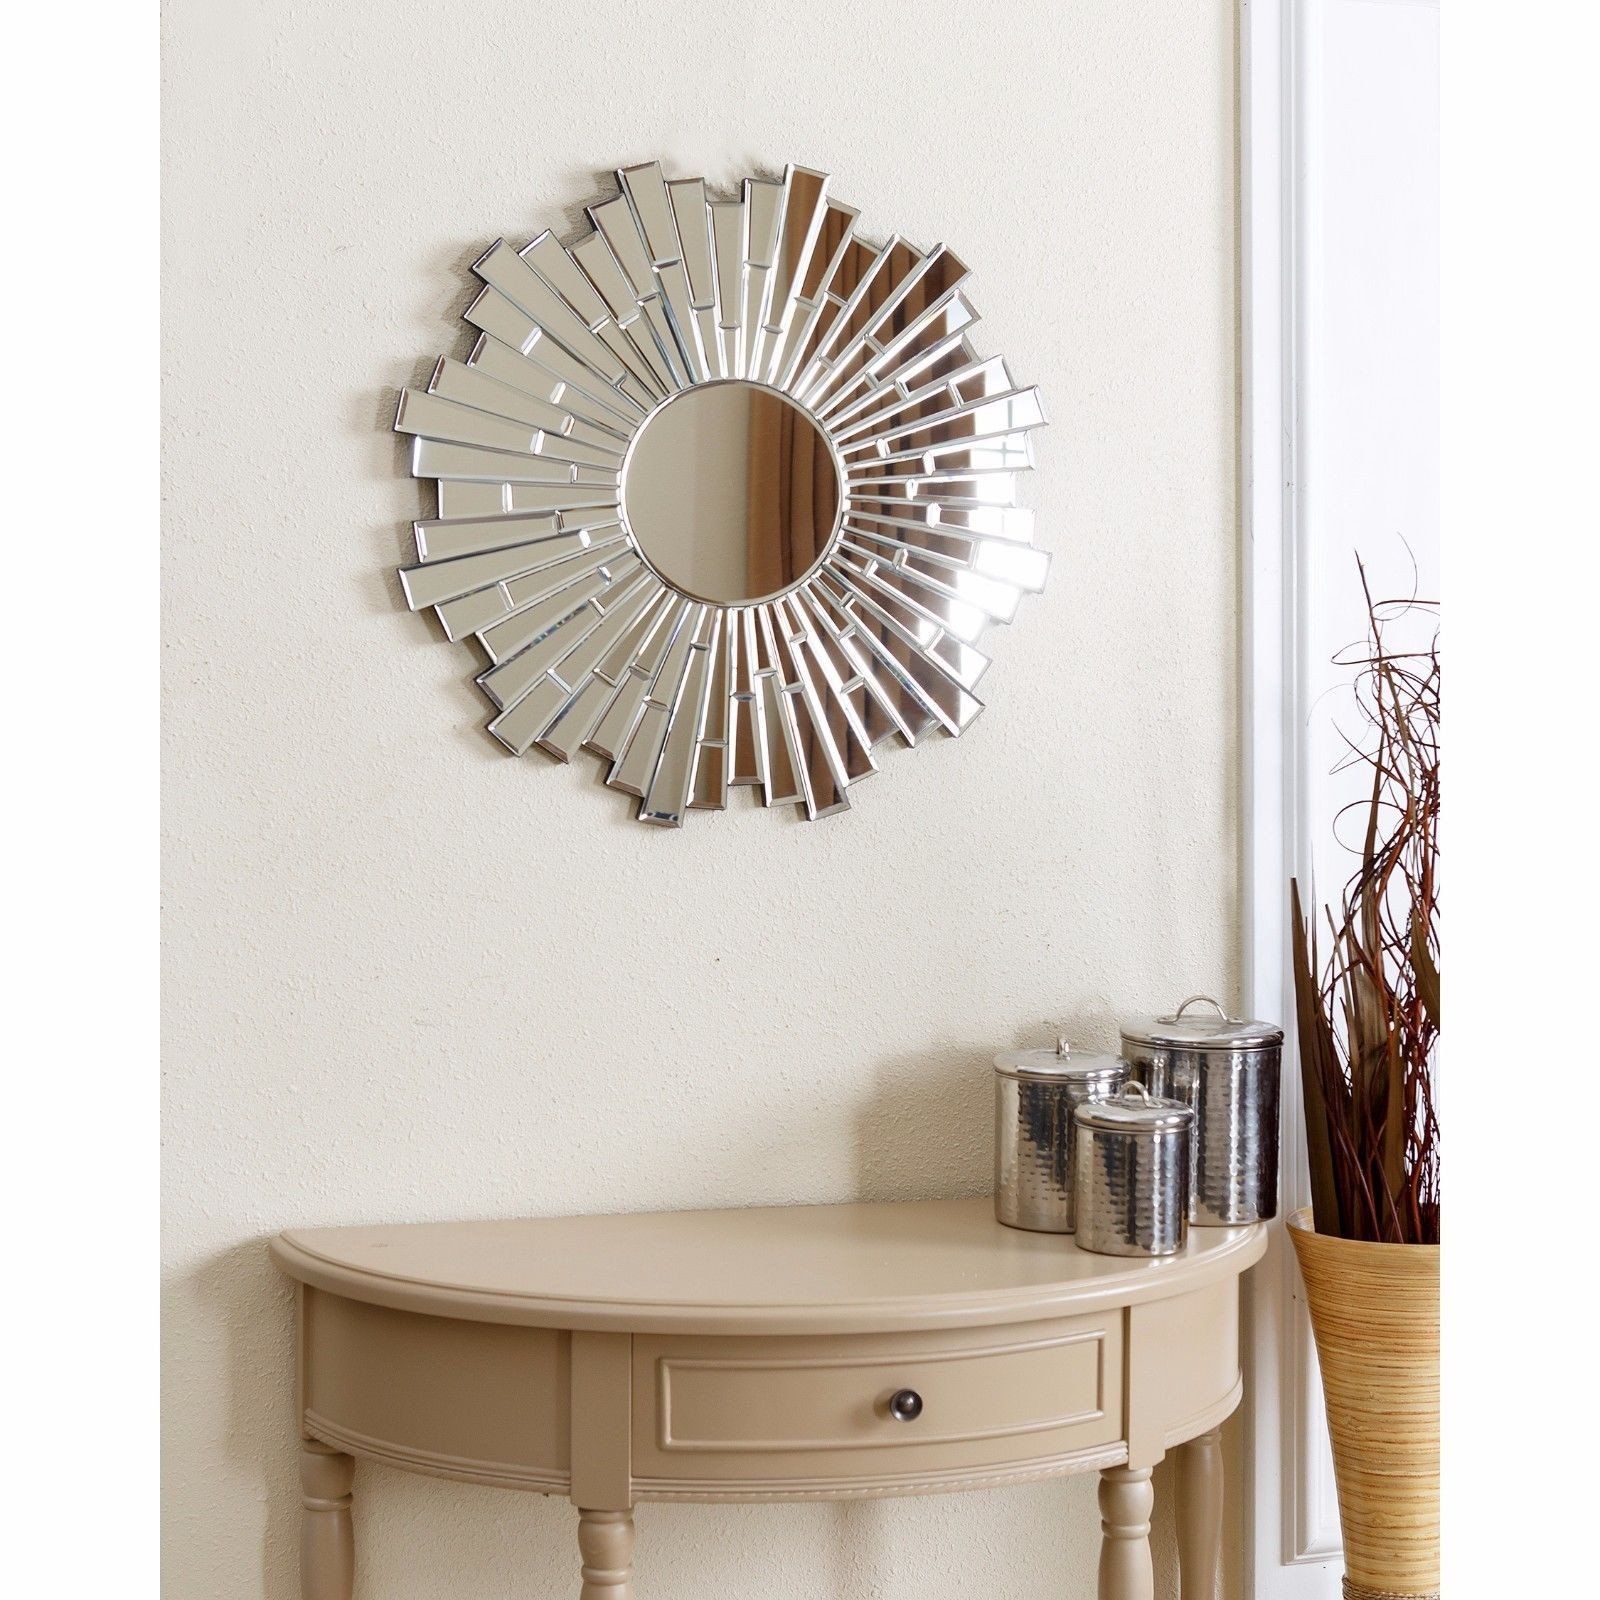 Small Mirrors For Wall Decor Inspirational Round Wall Mirror Modern Inside Decorative Round Wall Mirrors (View 8 of 15)